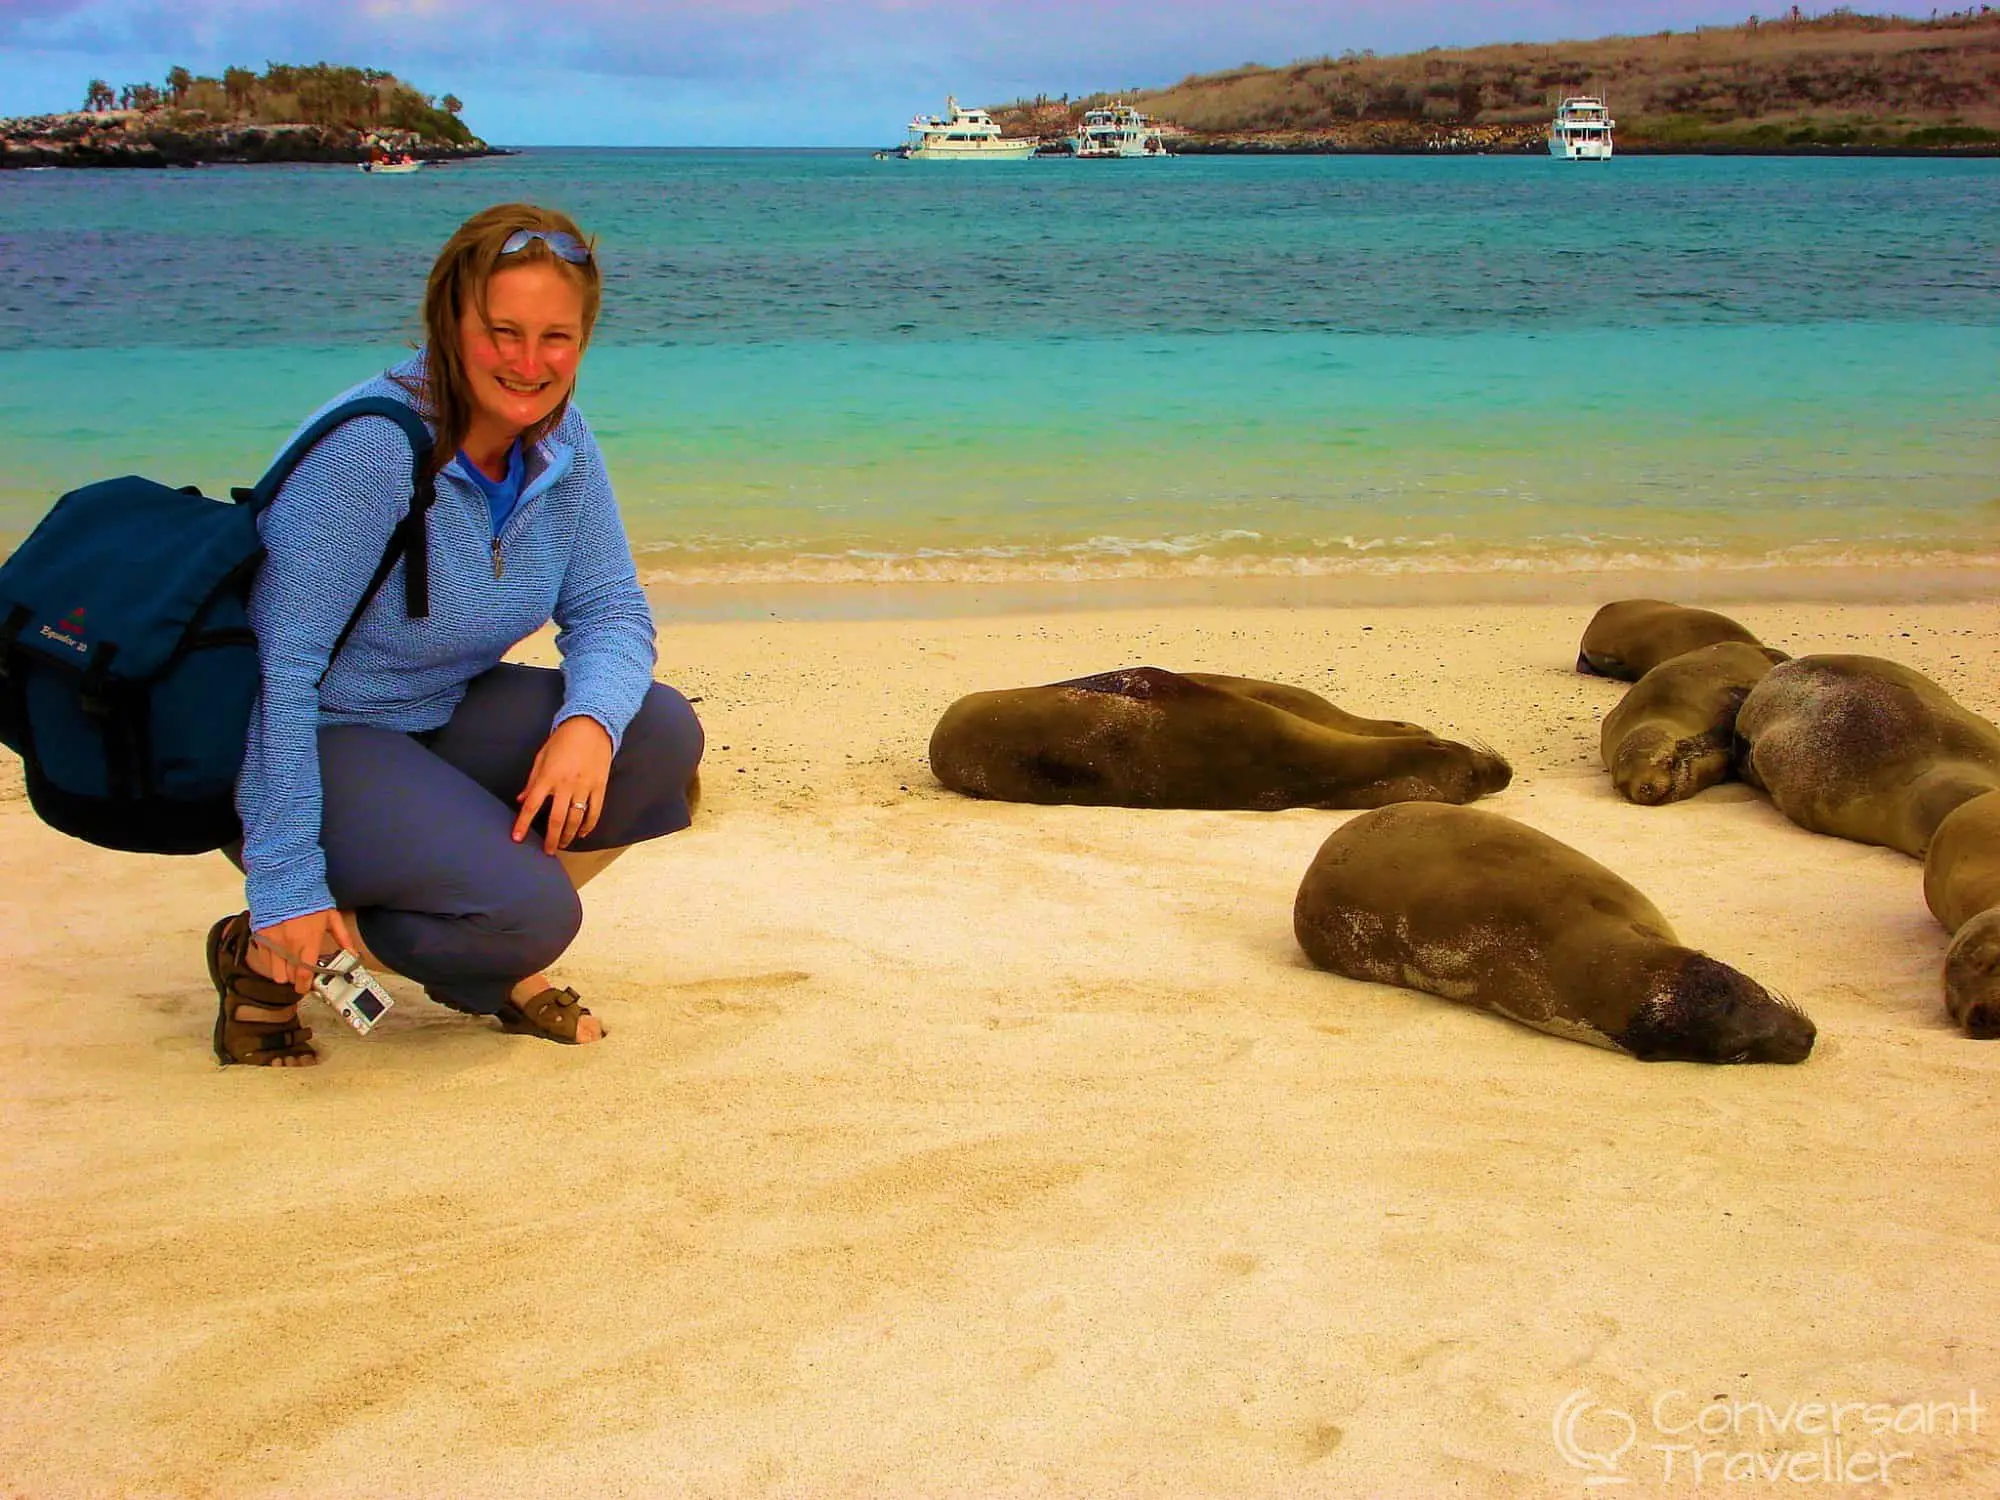 The only way to experience places like the Galapagos is on a shared boat tour - definitely worth it though!